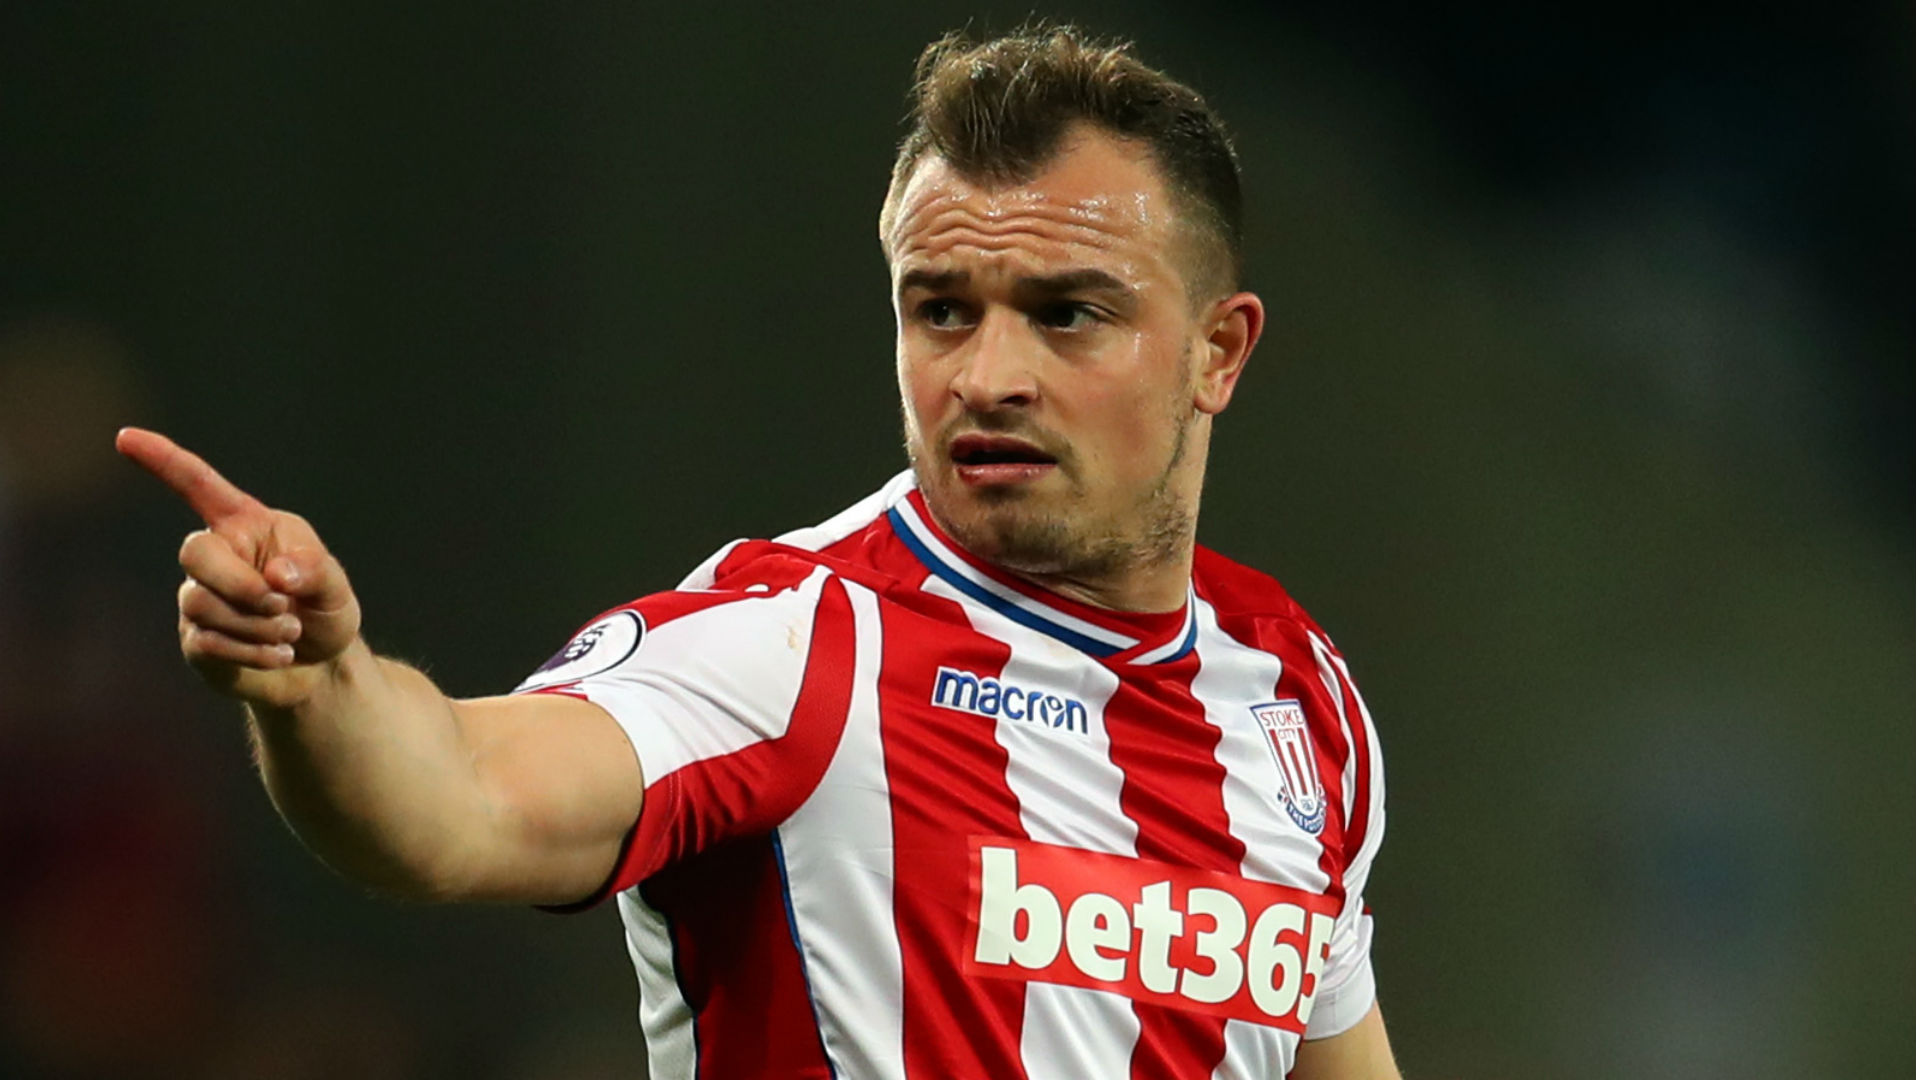 We believe until the end - Shaqiri targets three wins for struggling Stoke City